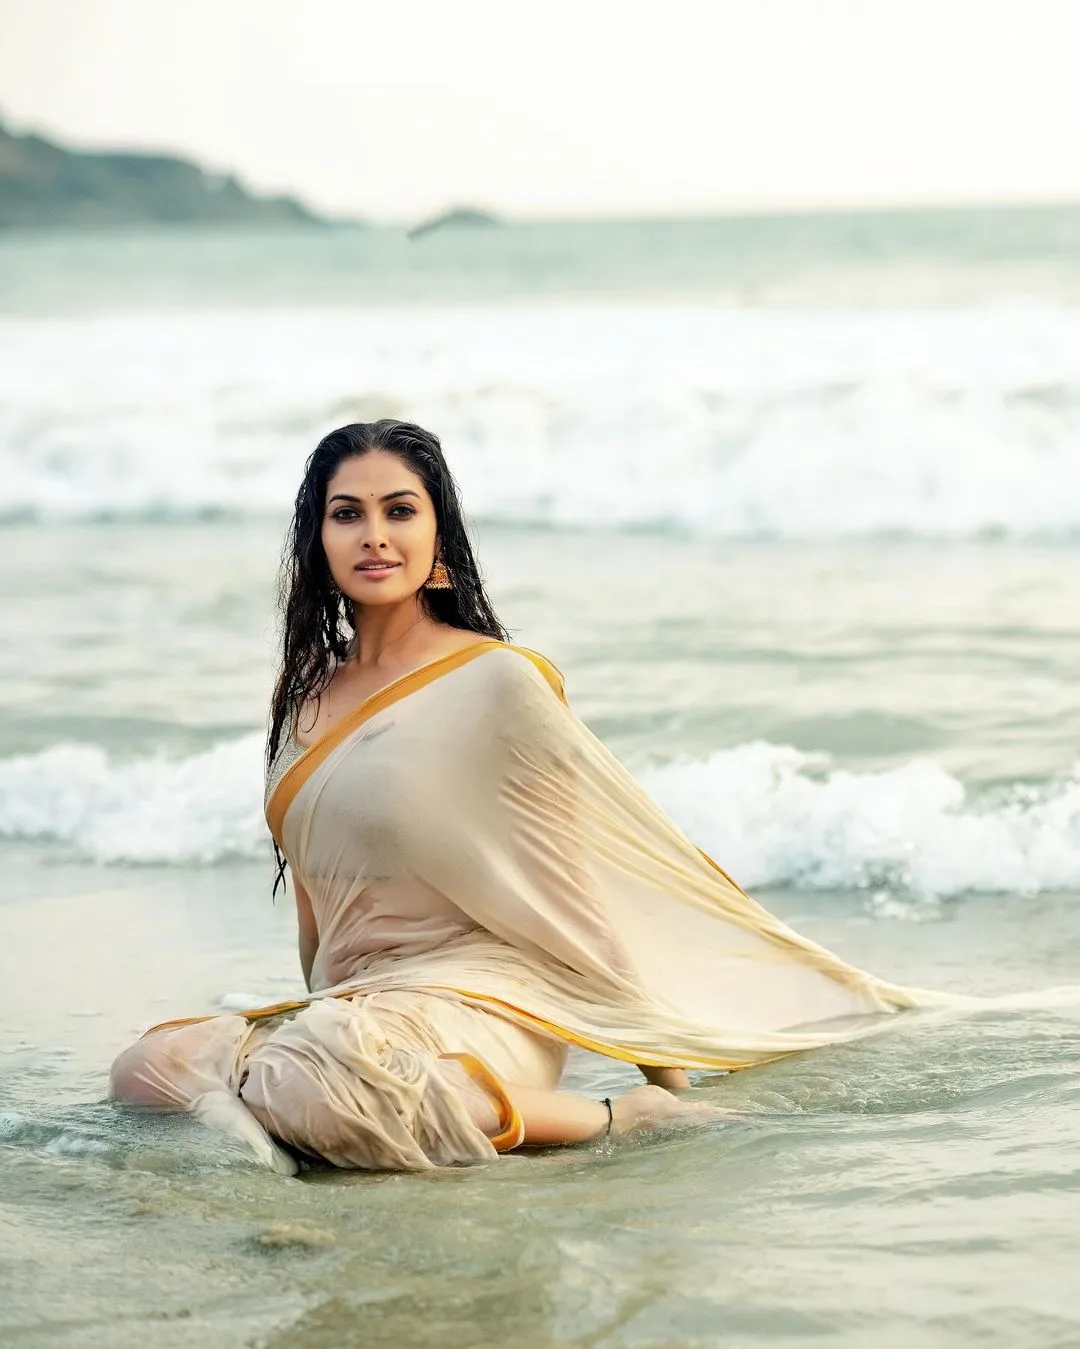 divi vadthya latest photoshoot in beach